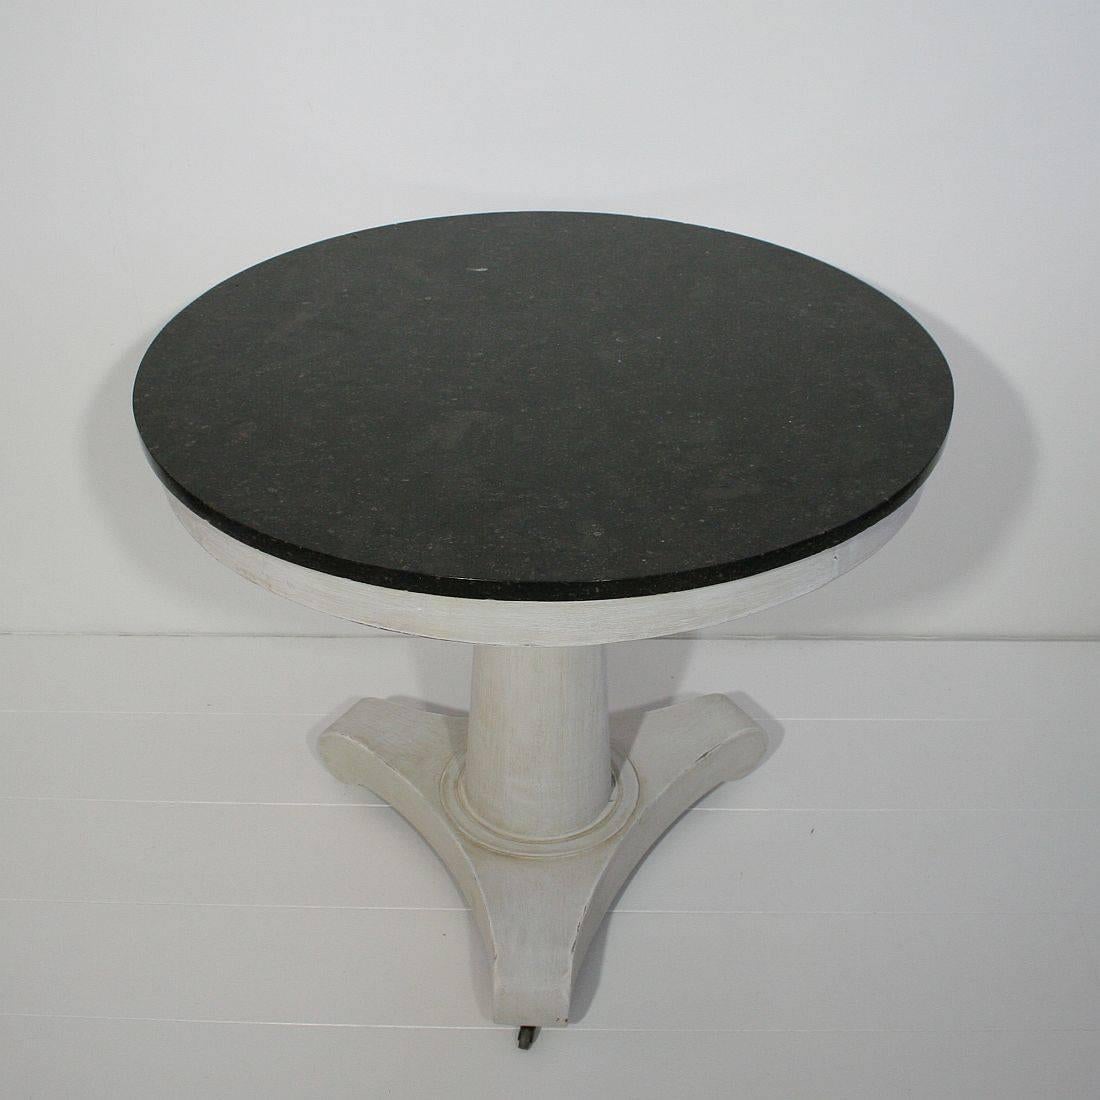 Painted French 19th Century Second Empire Gueridon Table with Black Marble Top